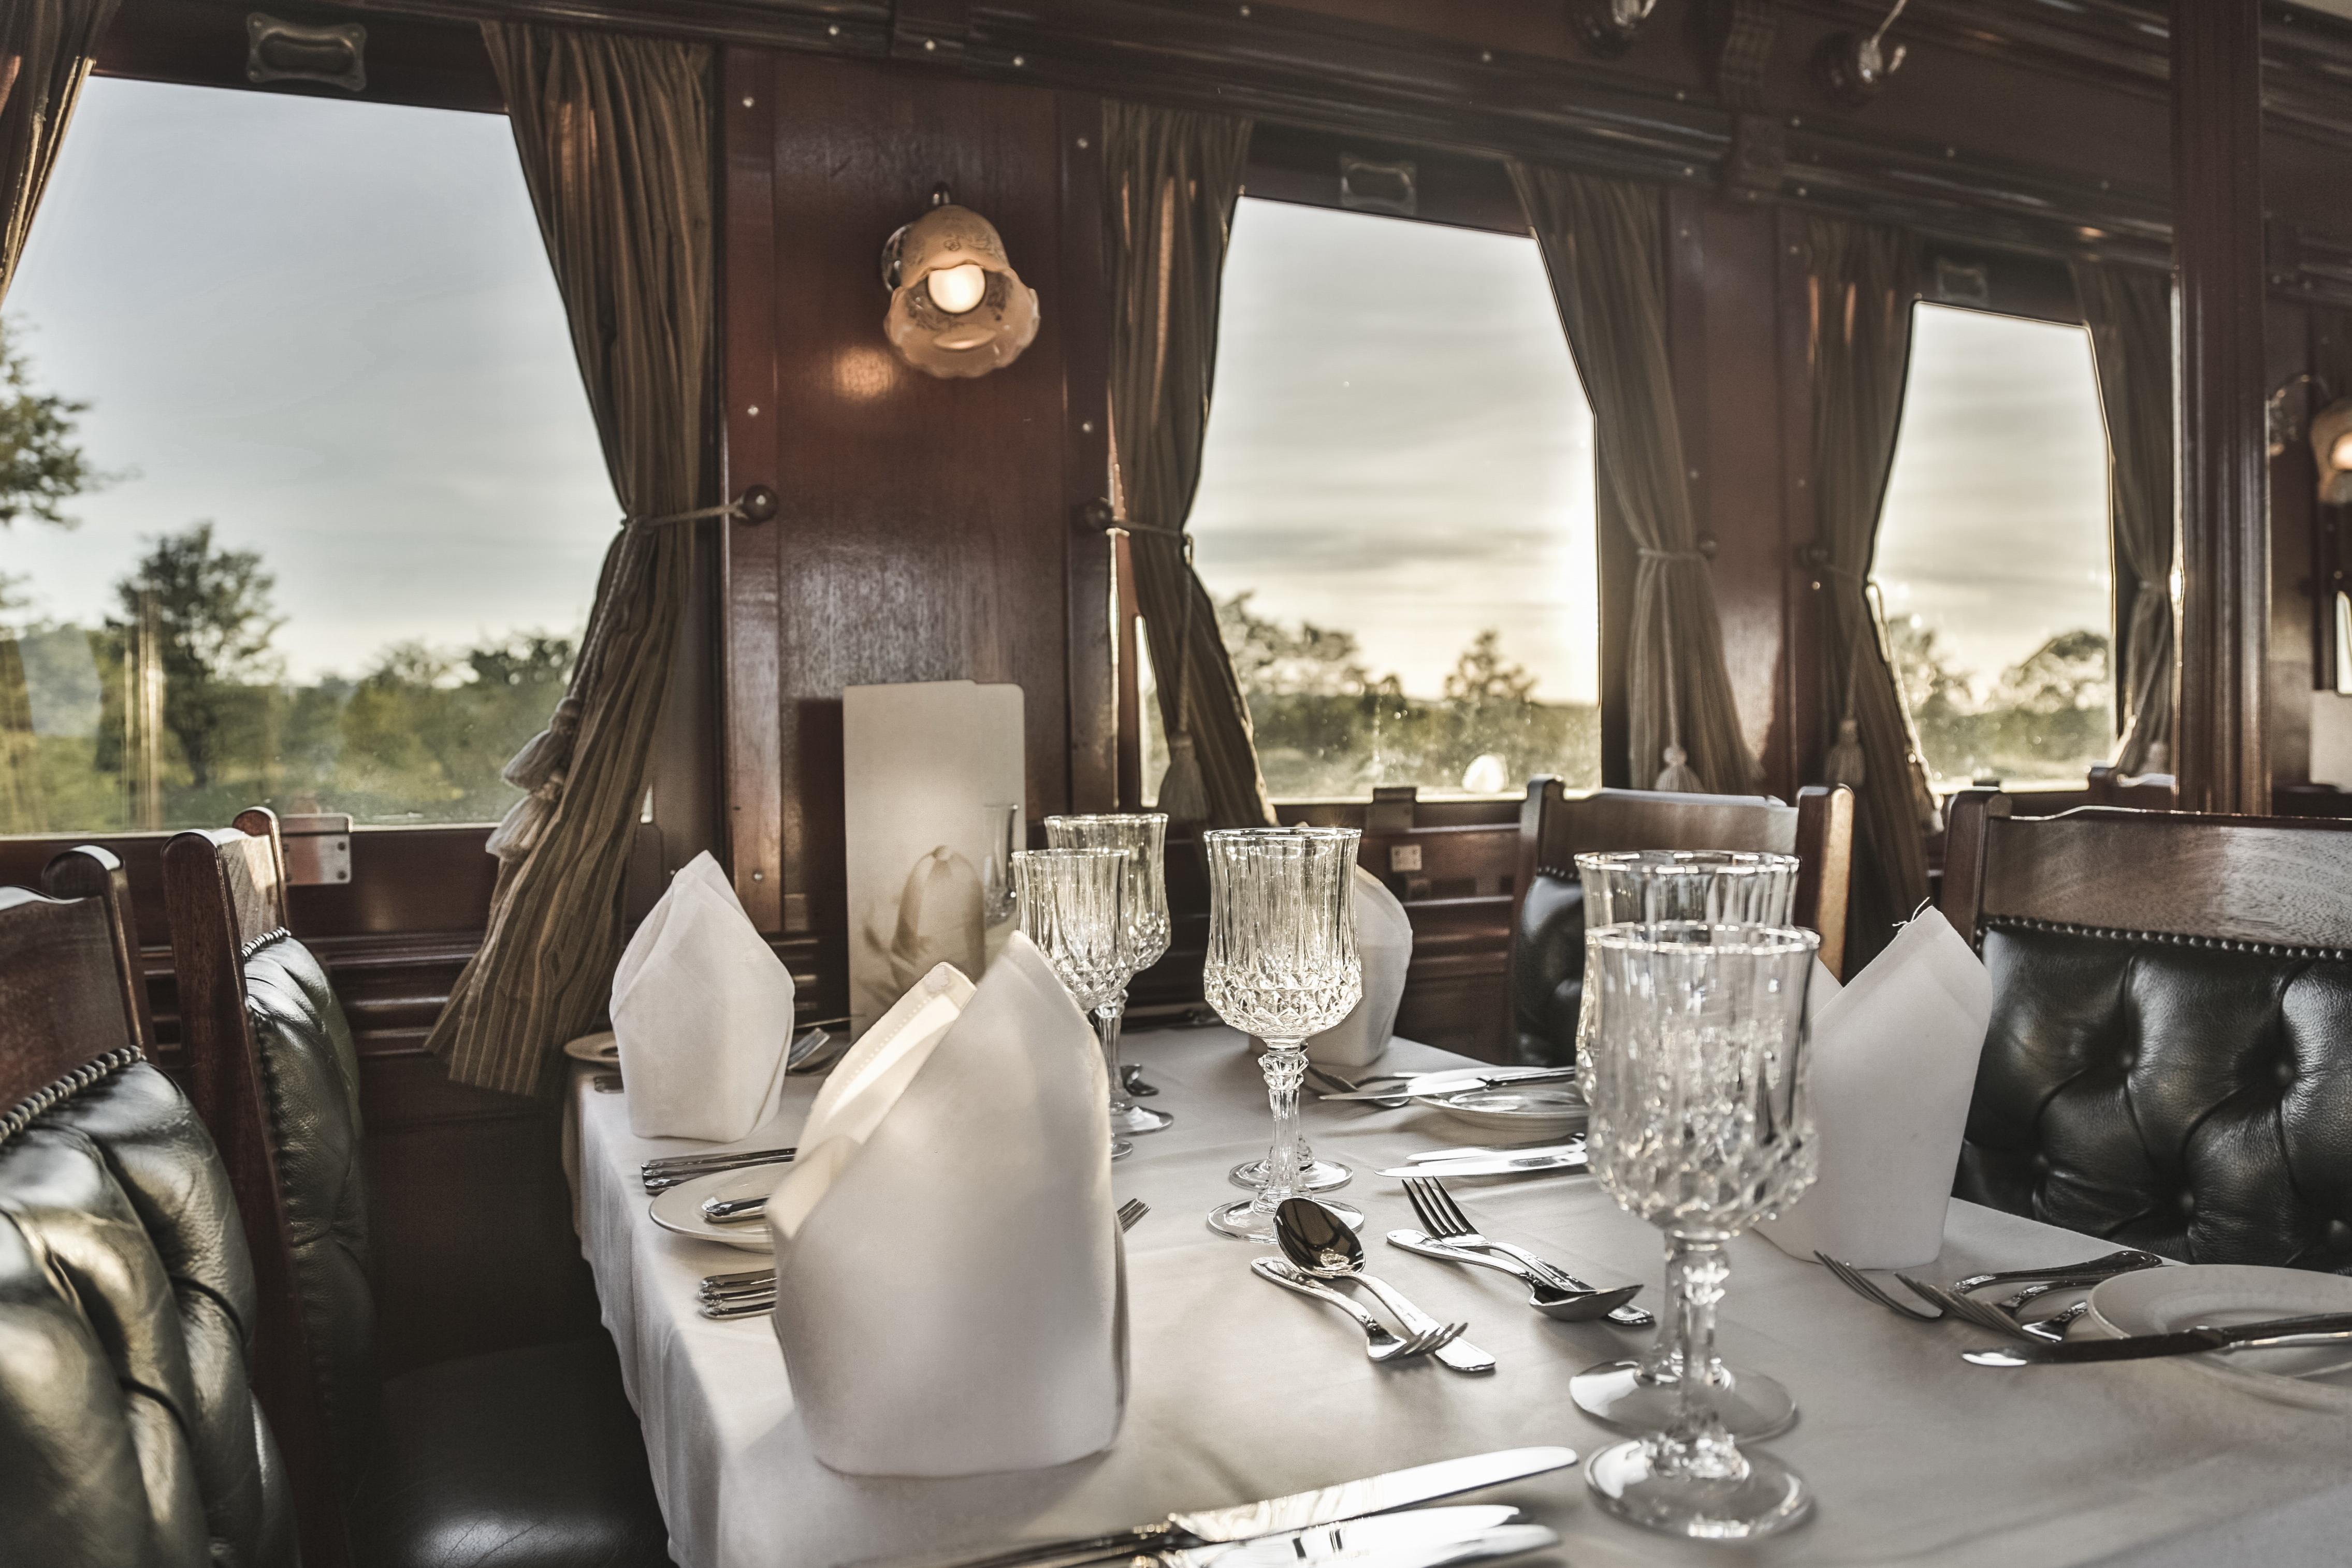 The dining car aboard the Royal Livingstone Express